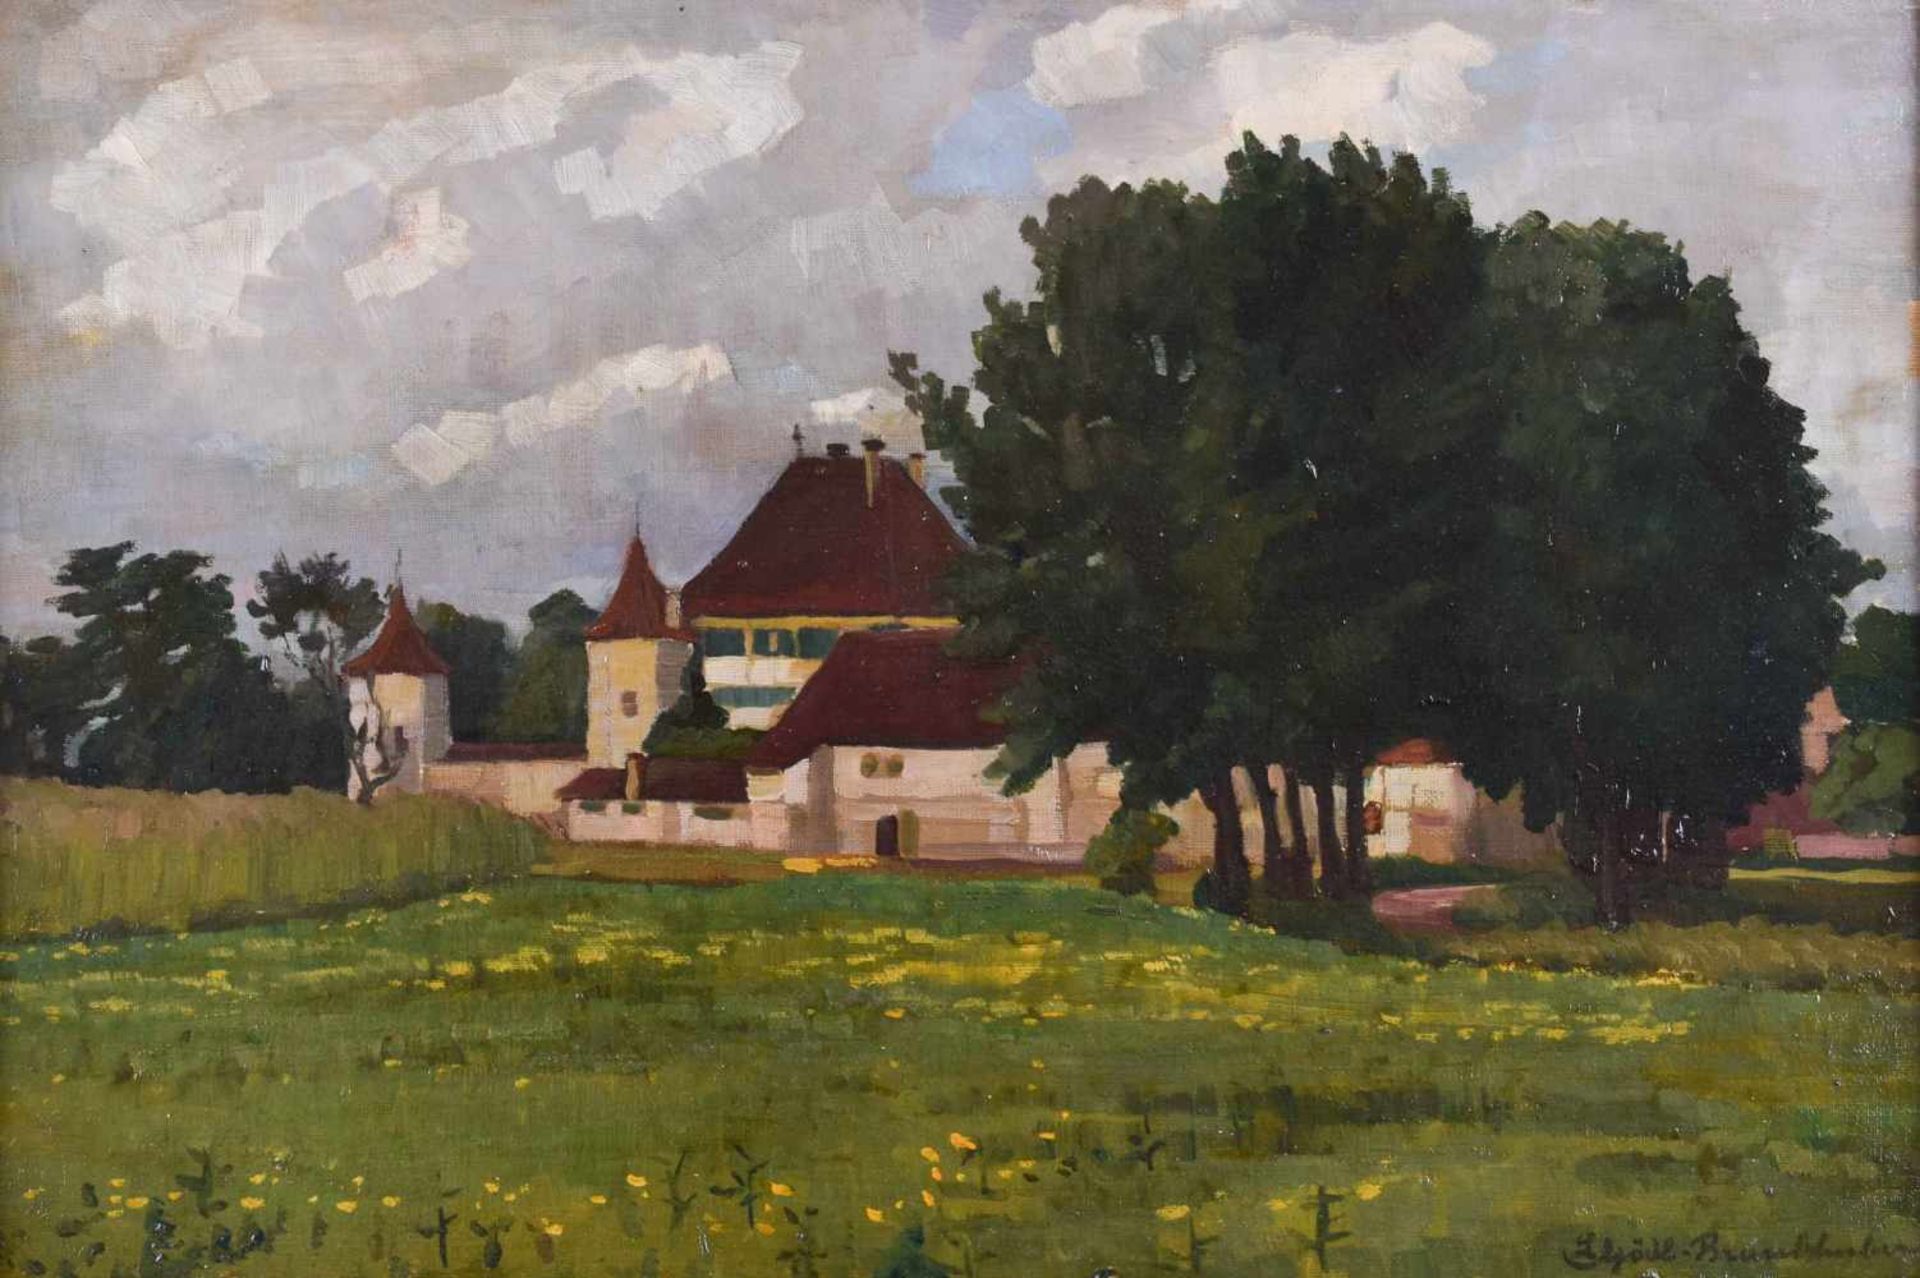 Lilli GÖDL-BRANDHUBER (1875-1946)"Castle in the countryside"painting oil / canvas, 40.5 cm x 59